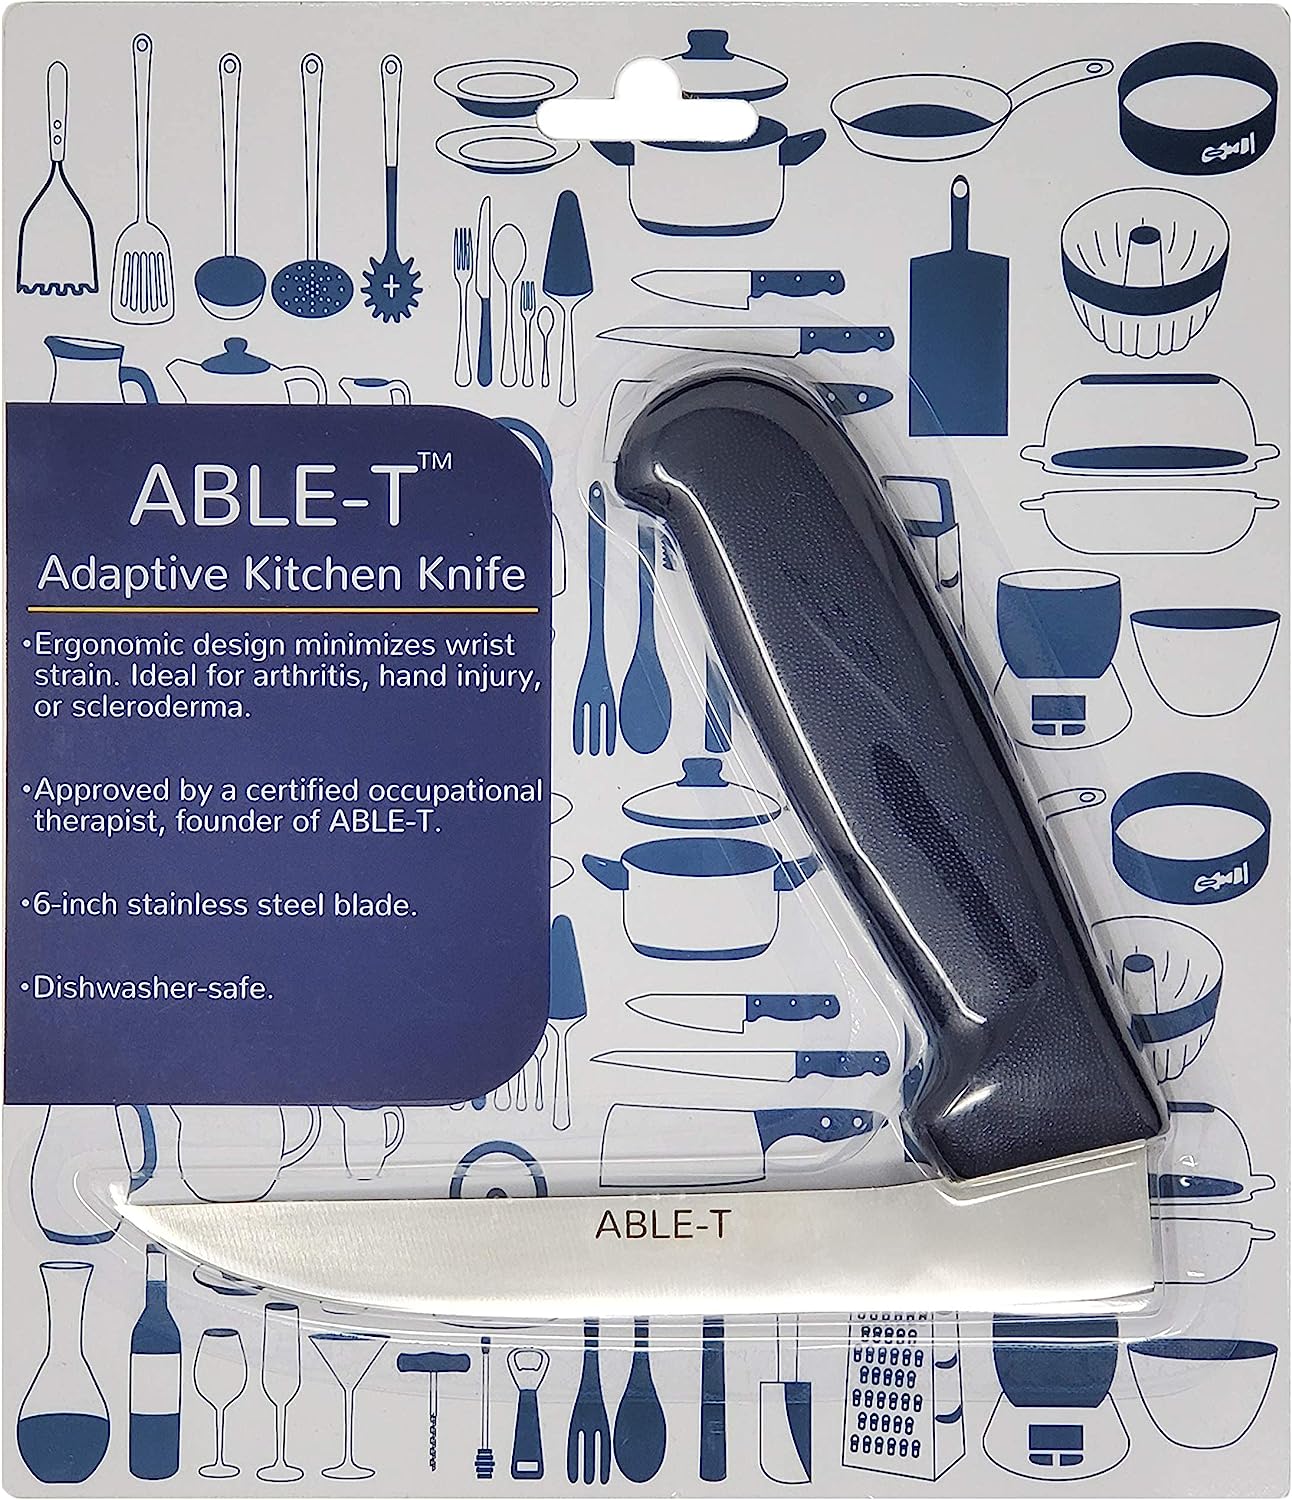 ABLE-T Right Angle Knife, Approved by a Certified Occupational Therapist